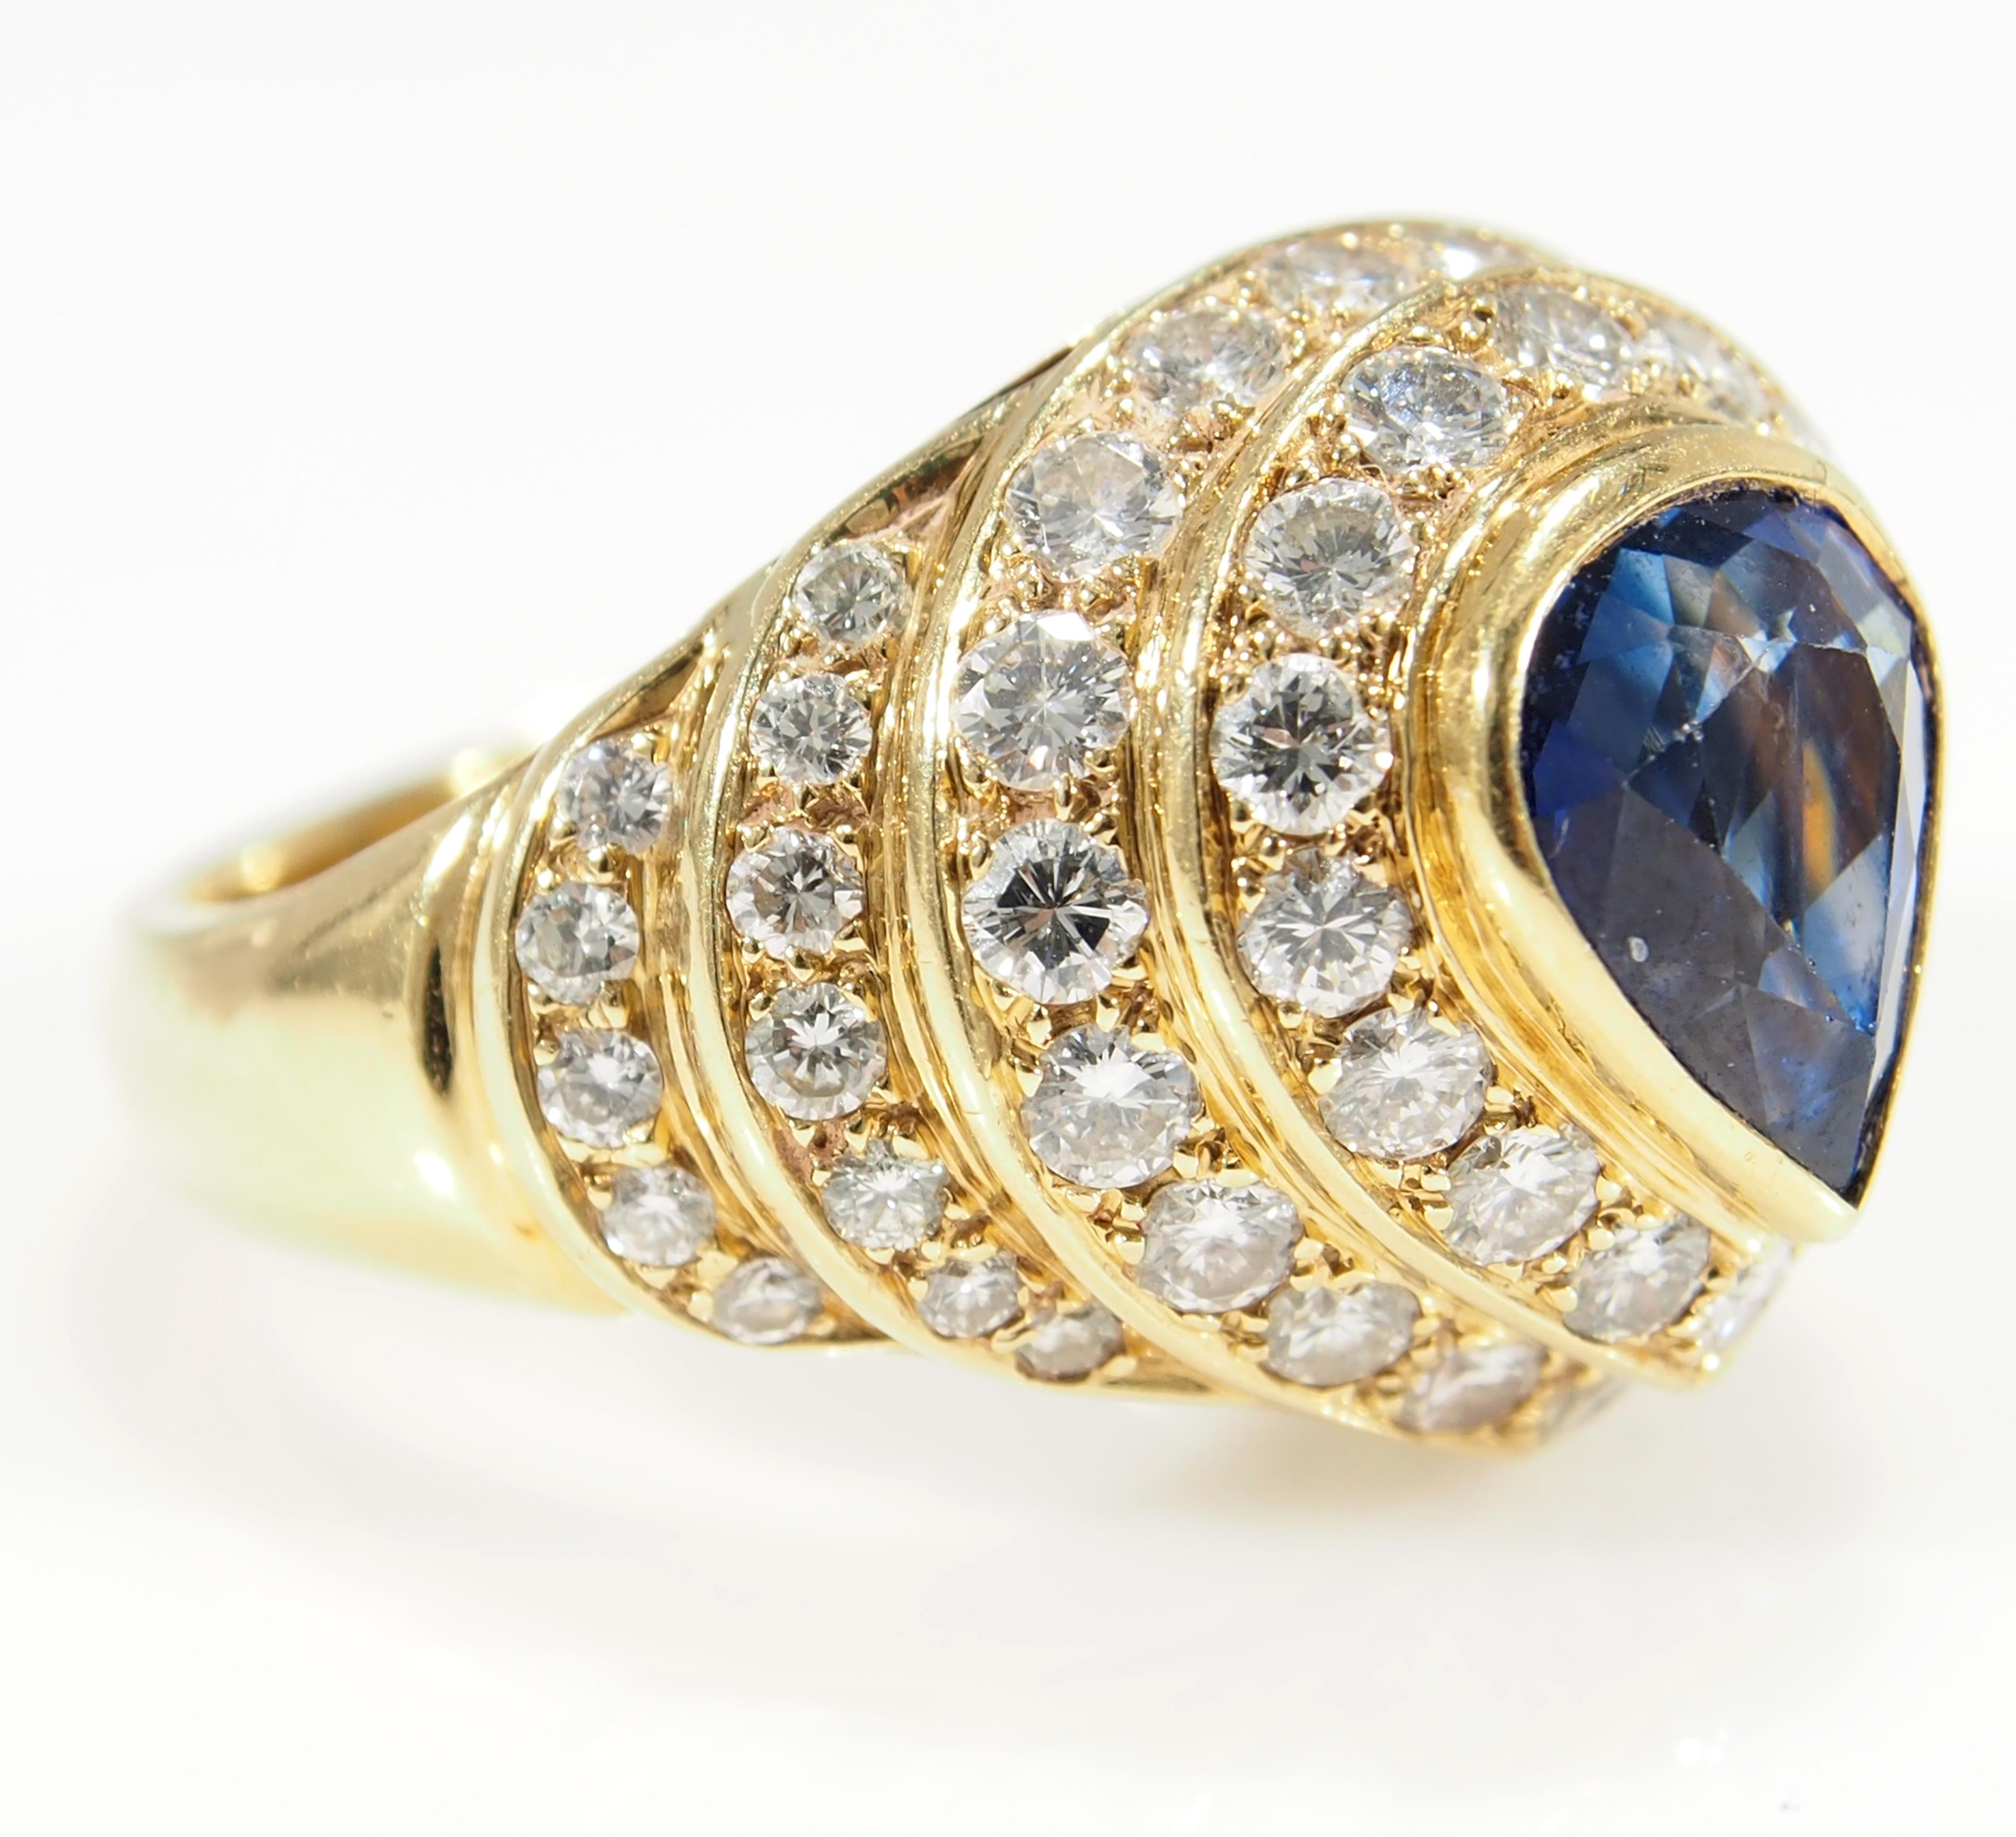 This is a lustrous 18K Yellow Gold Diamond and Sapphire Dome Ring. This sparkling Ring is fashioned with (1) Pear Shape Sapphire, approximately 2.00ct. as the center of the Dome accented by (4) Rows of concentric circles set with (57) Round